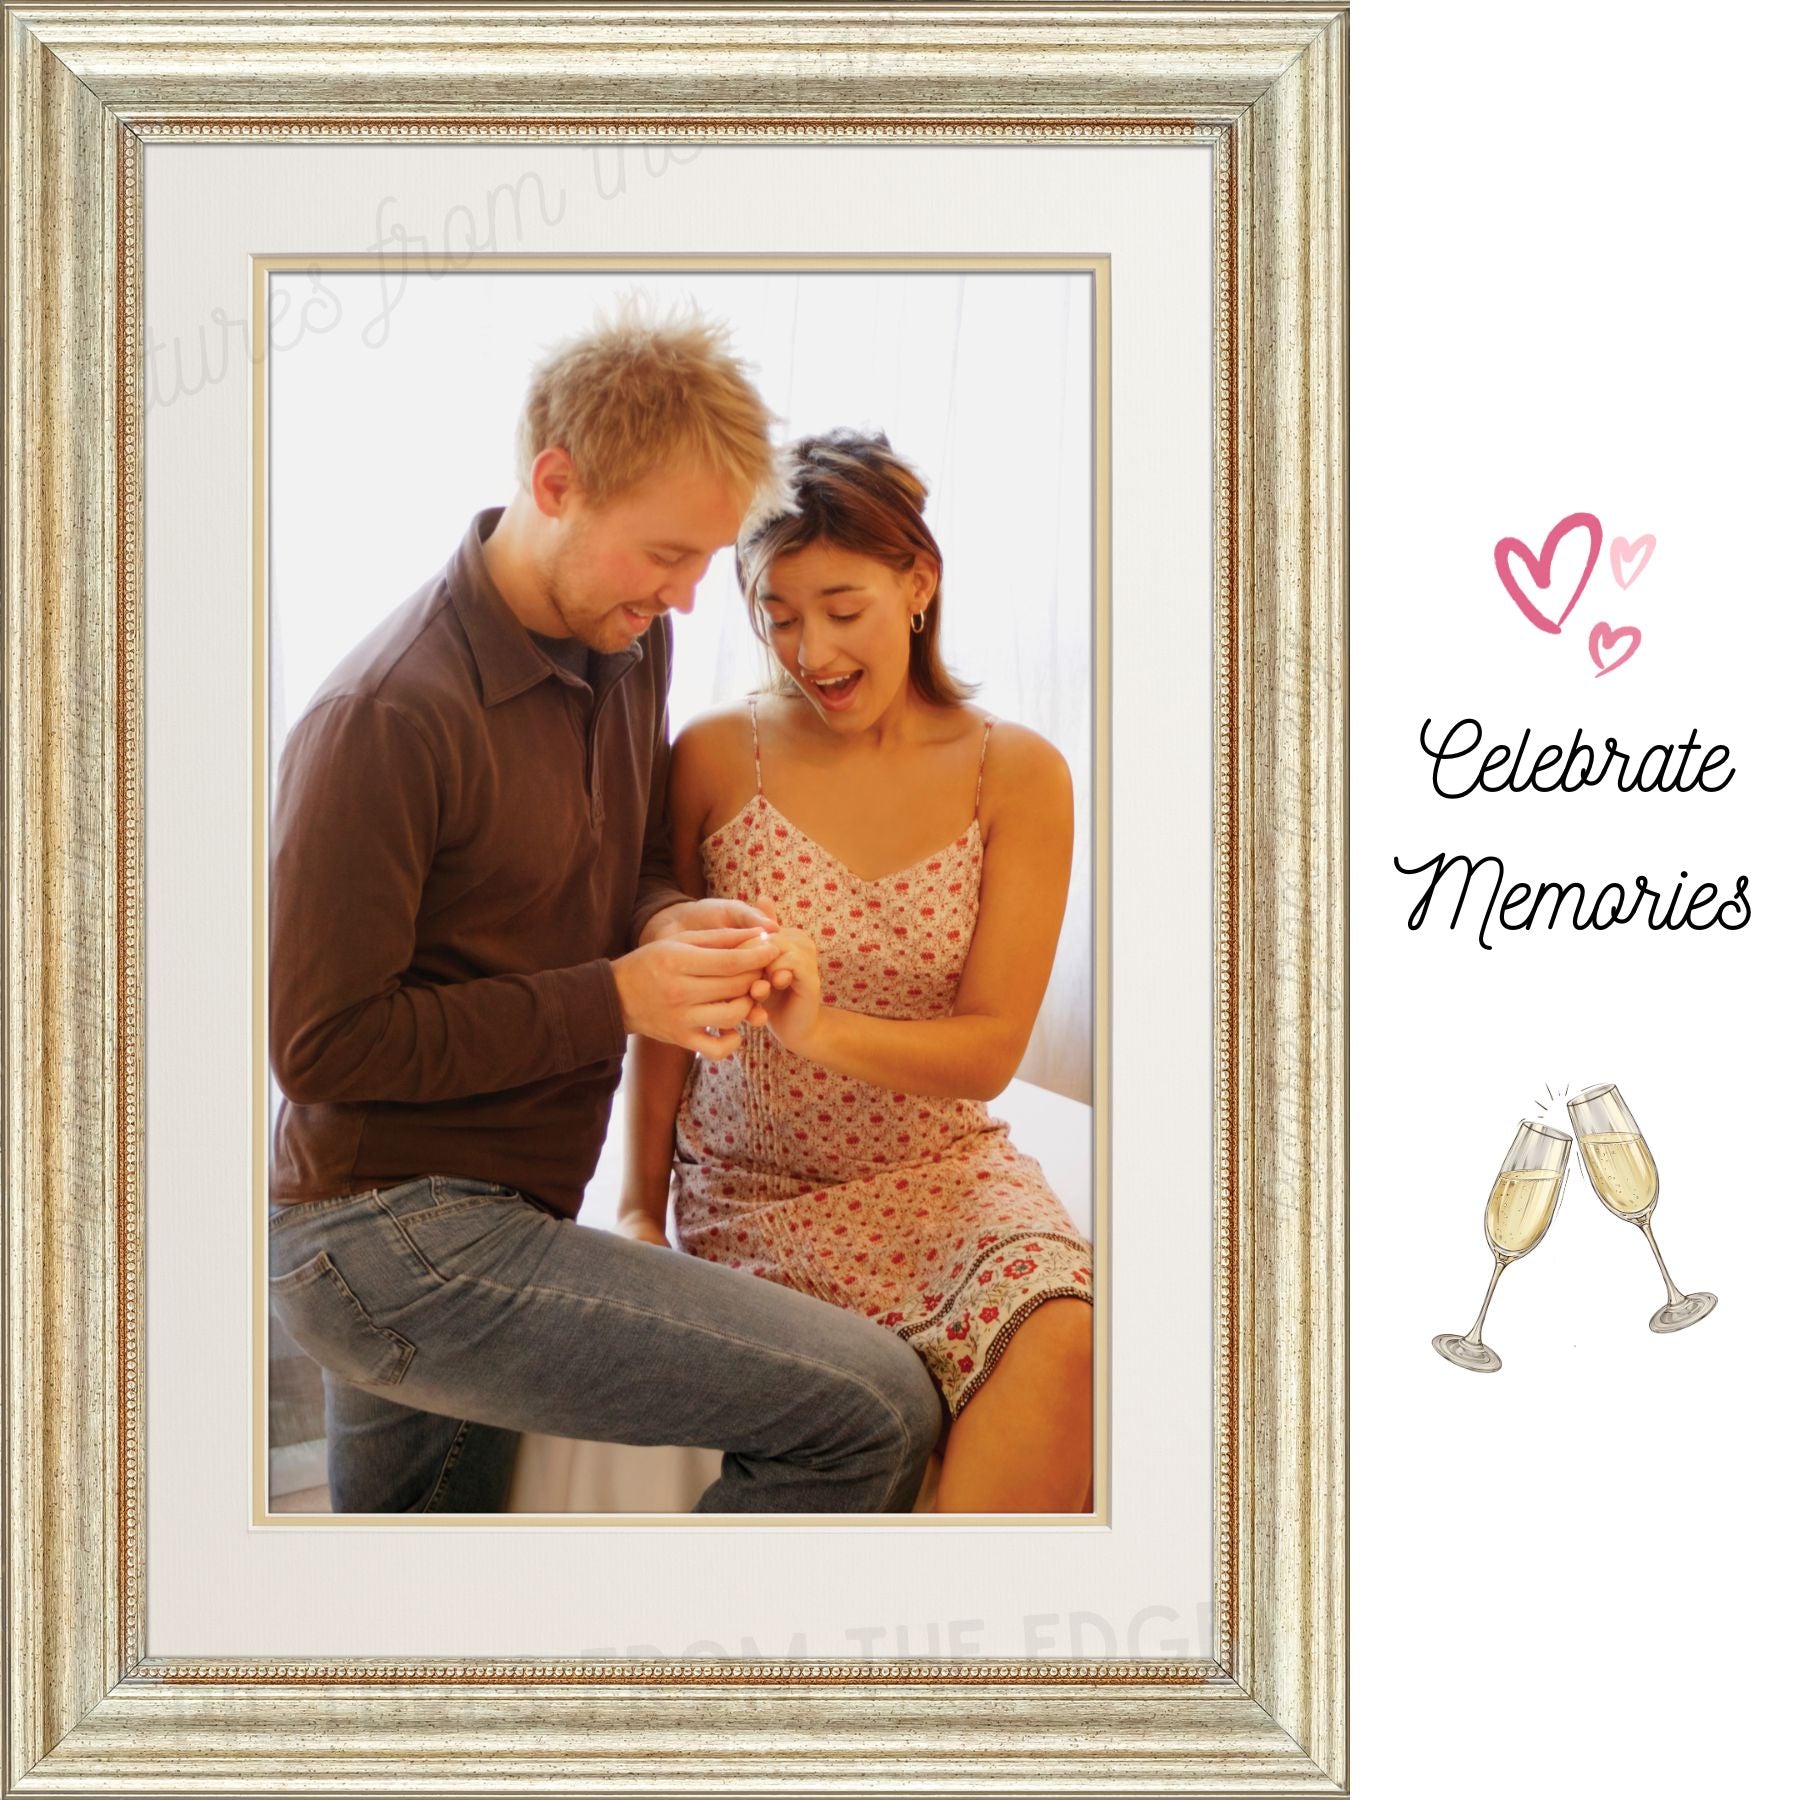 Custom Poster Bronze Frame. Moveable and removeable. Celebrate memories!